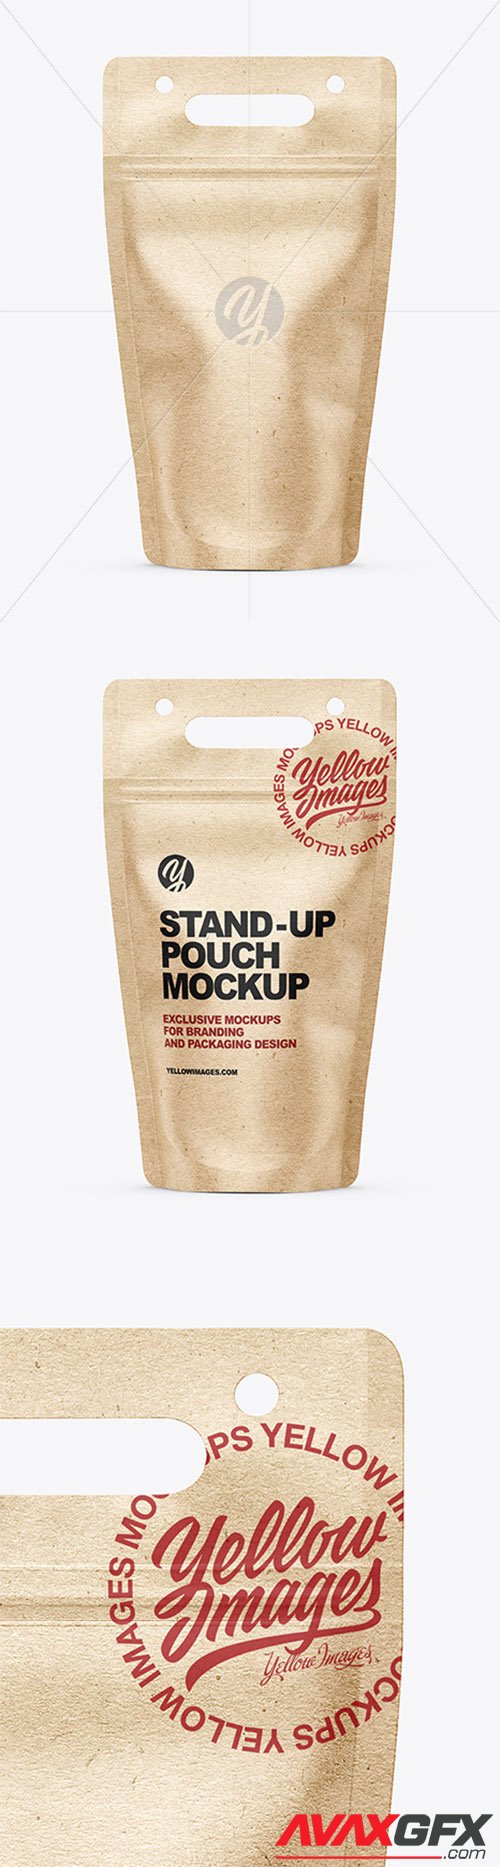 Kraft Stand-up Pouch Mockup 79429 TIF